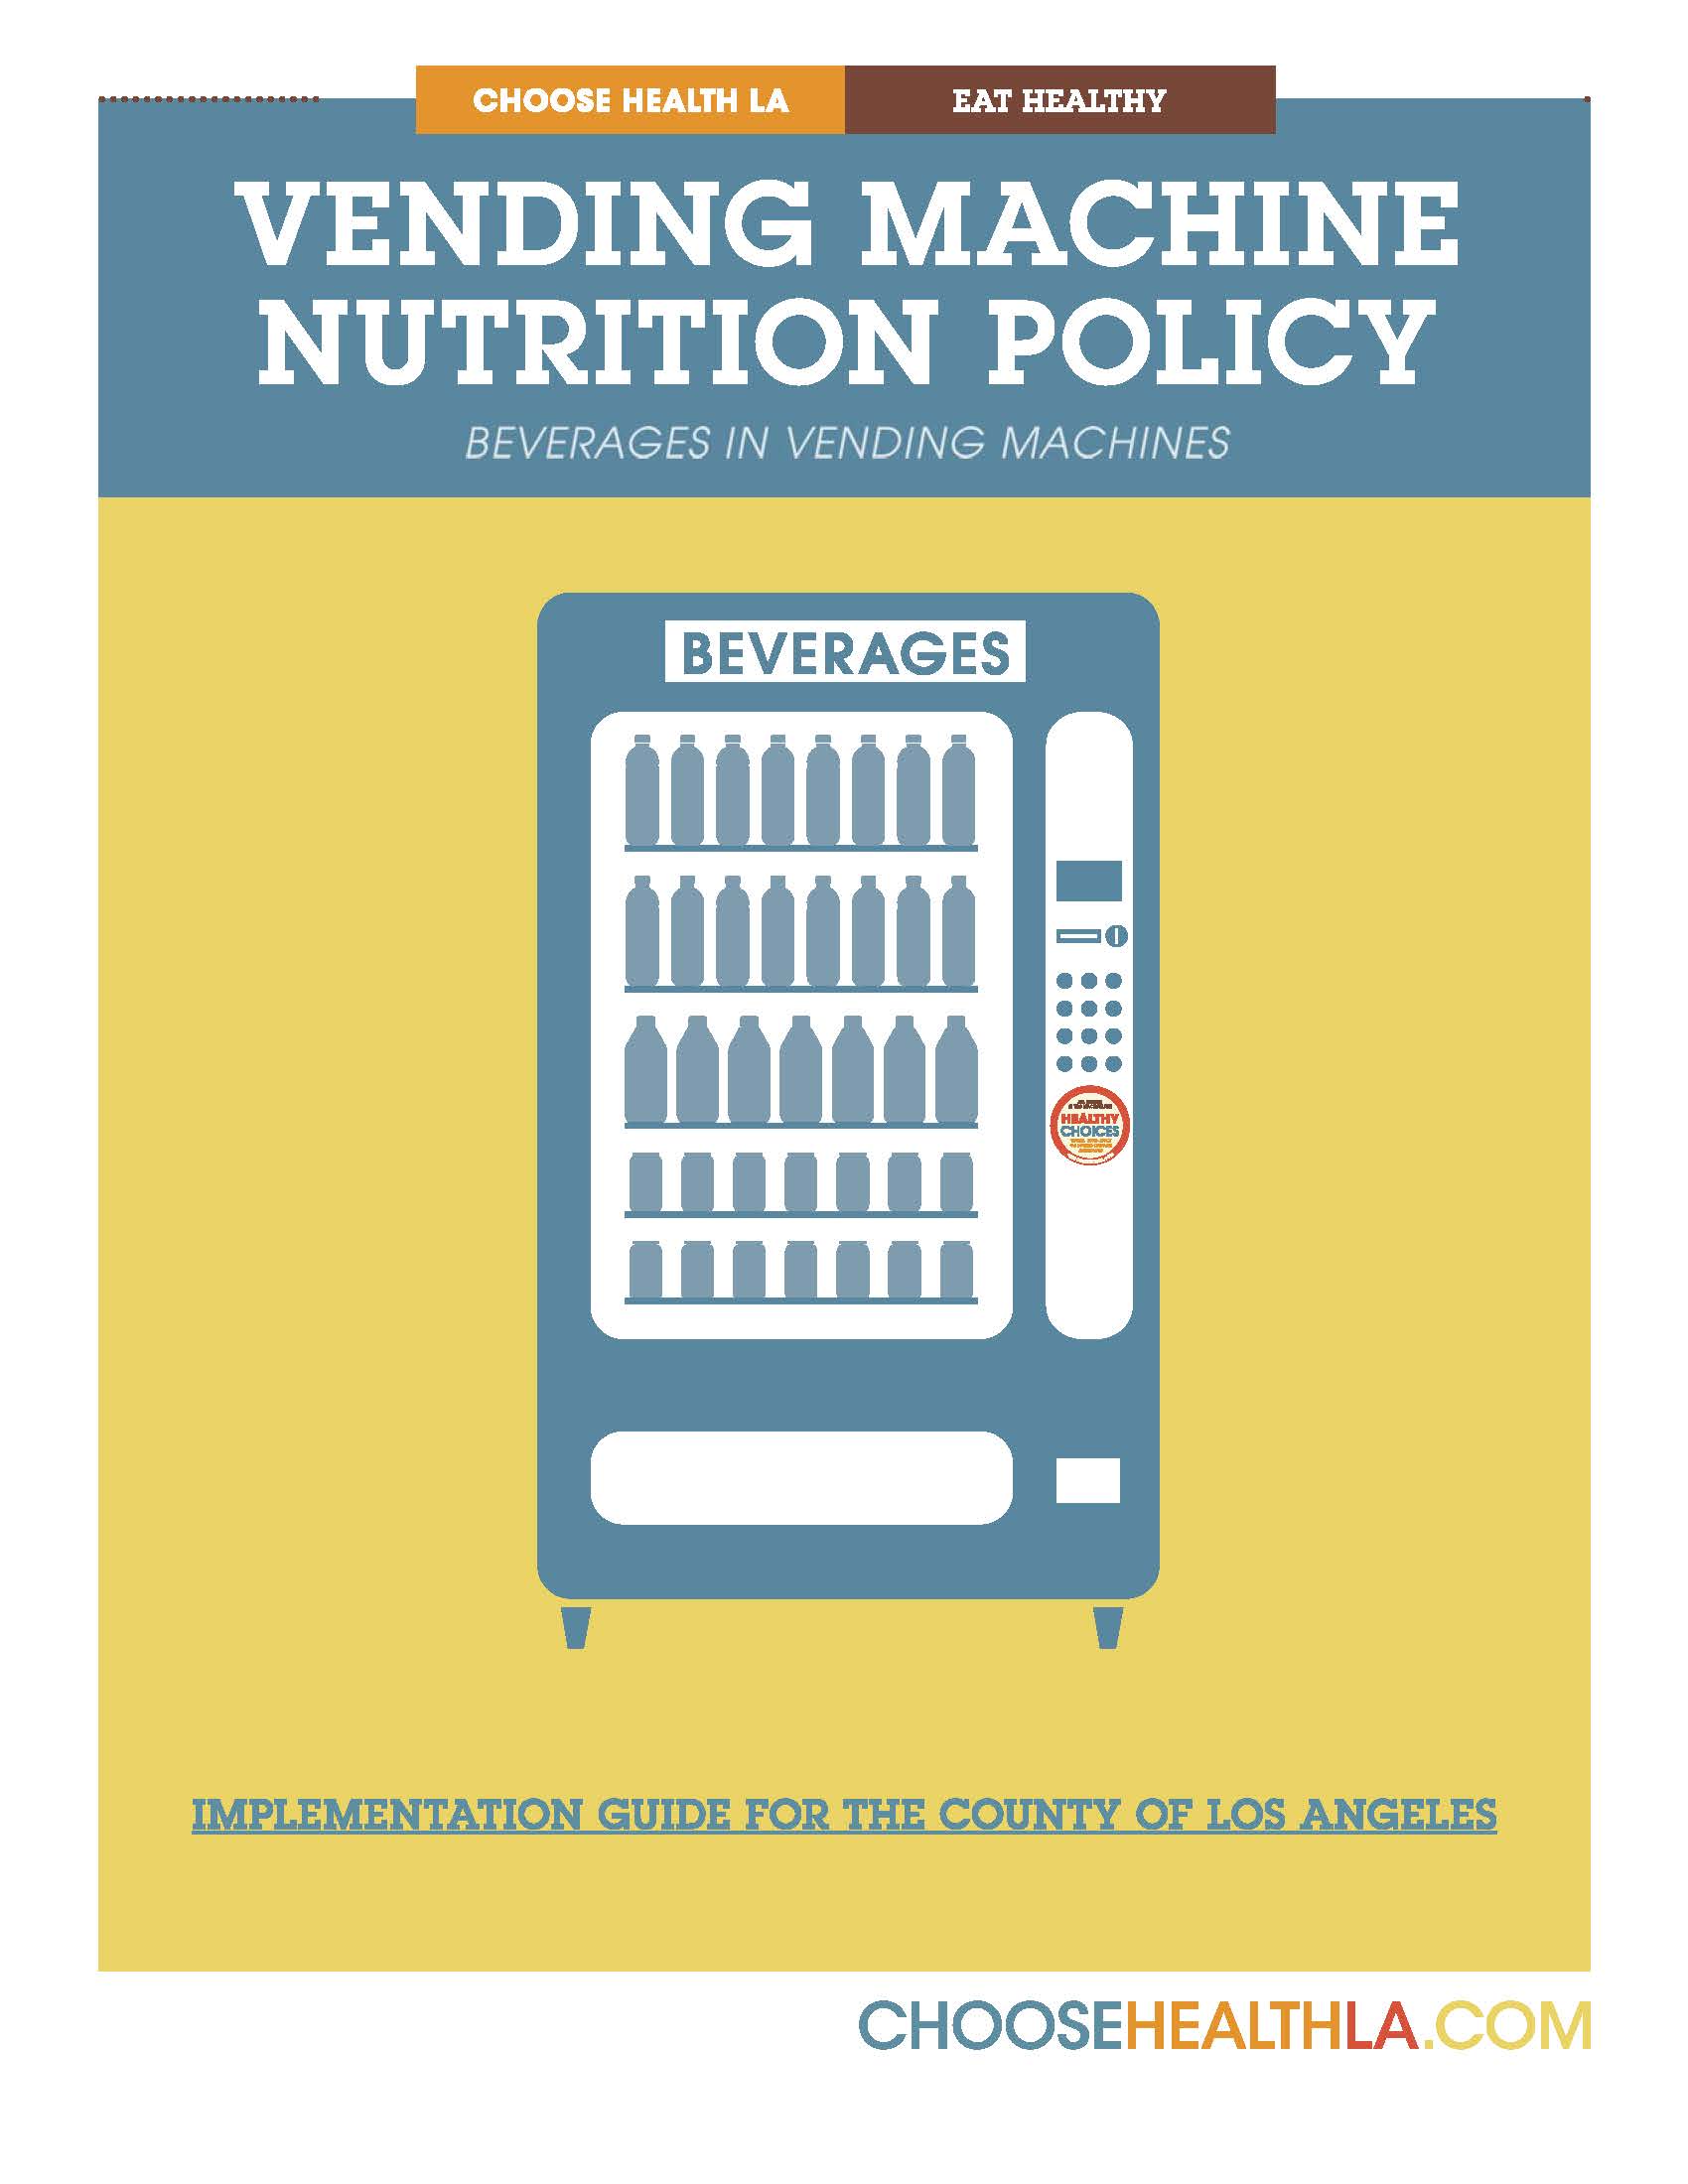 Vending Machine Nutrition Policy for Beverages